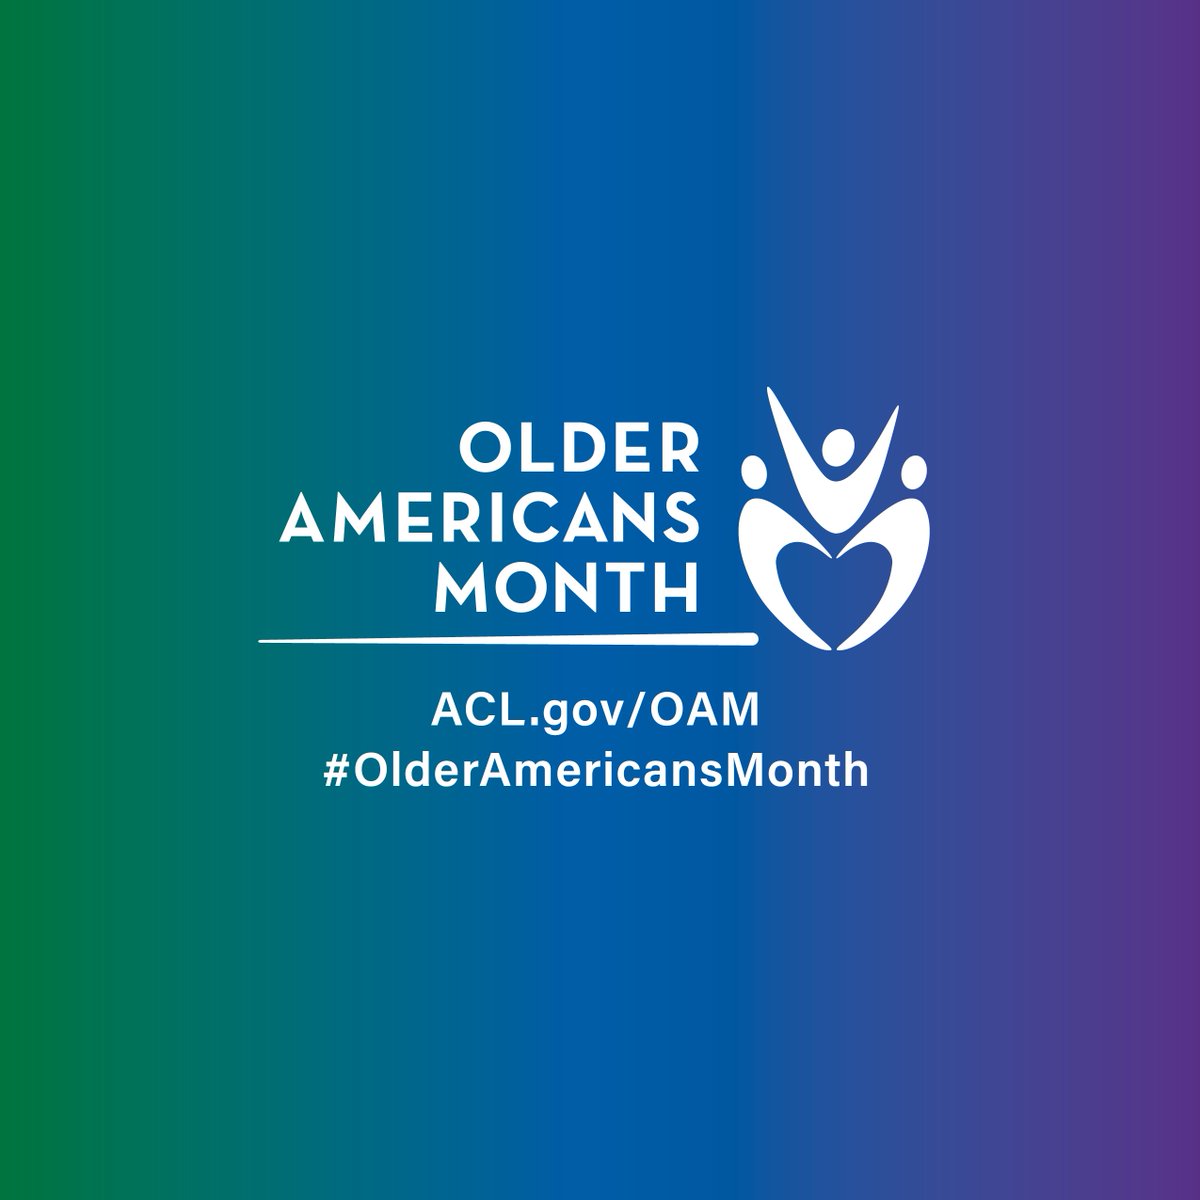 This #OlderAmericansMonth explore how connectedness supports aging in place. 👉Check out engagingolderadults.org, which helps organizations and communities address the root causes of social isolation.